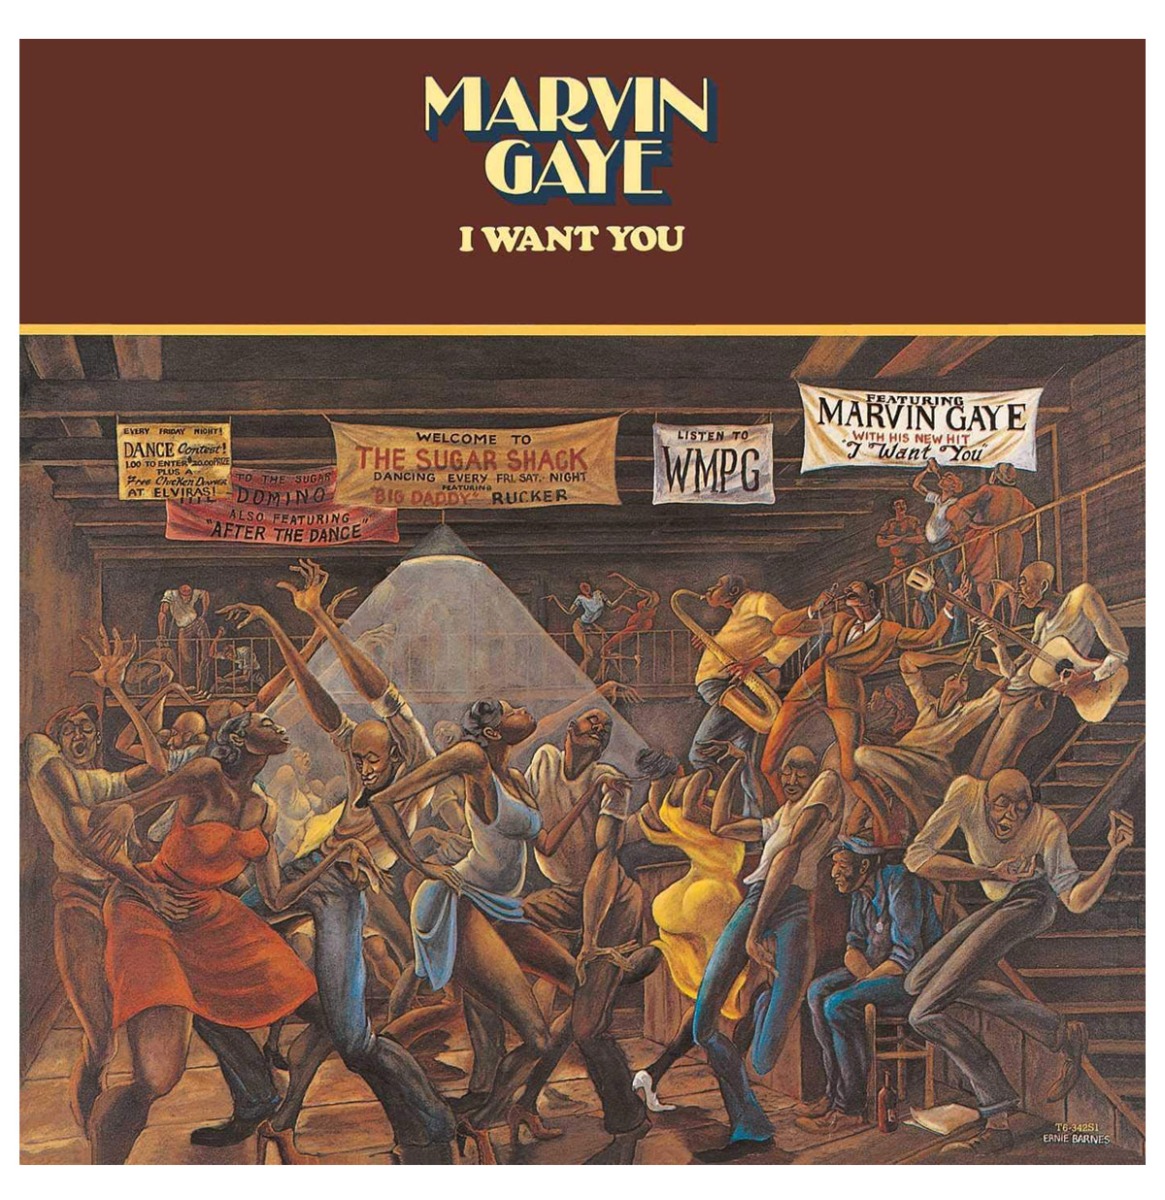 Marvin Gaye - I Want You LP